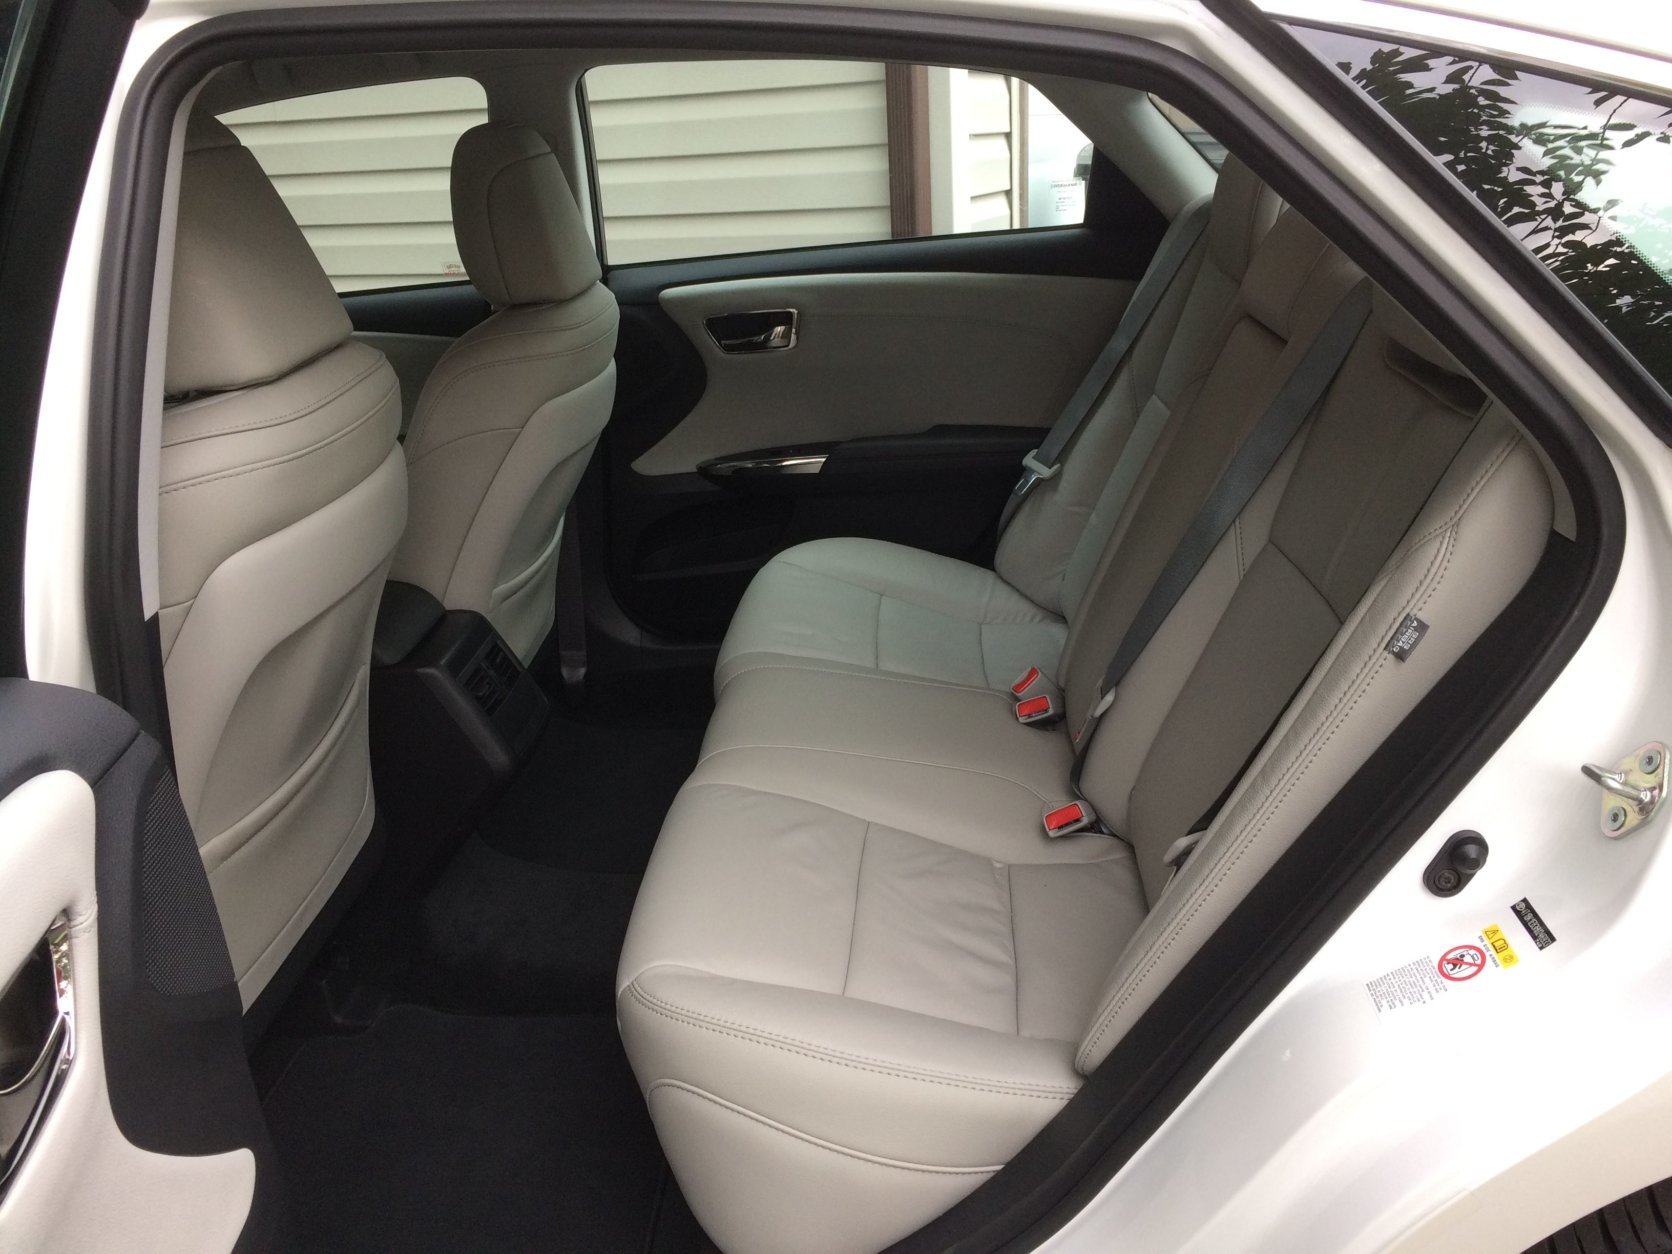 Rear seat riders have good leg room and head room, and it’s easy to get in and out of with a large door that opens wide, but the rear seats do not fold down. (WTOP/Mike Parris)